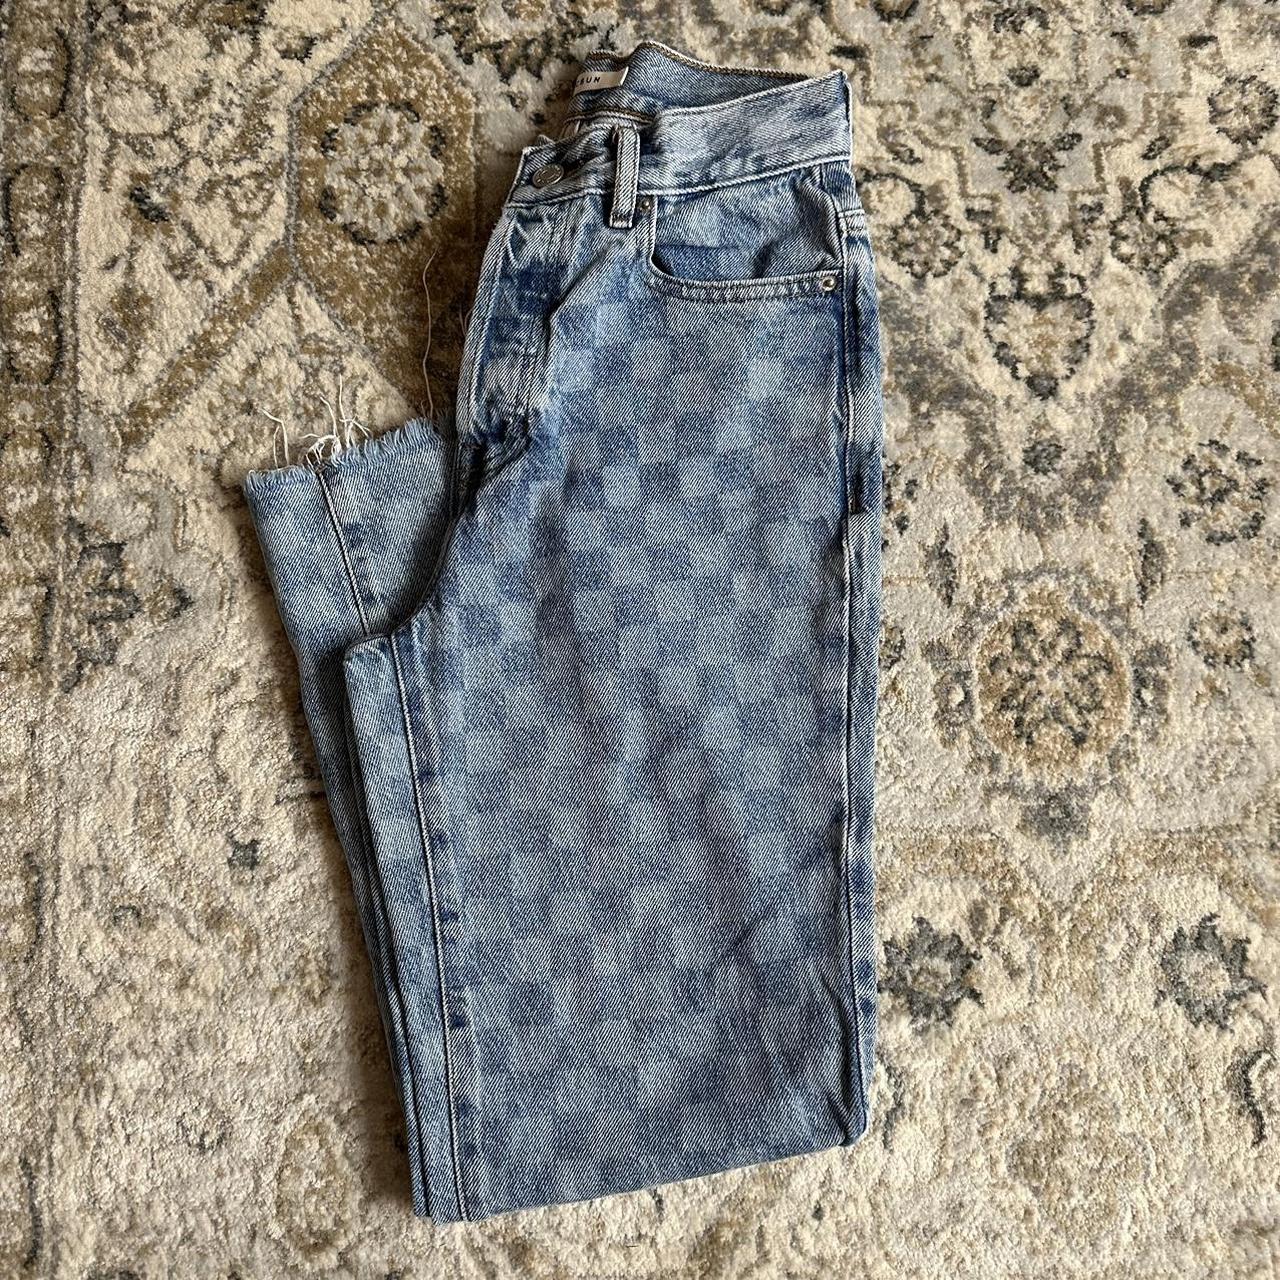 Pacsun Women's High Waisted Printed Jeans - Blue - 24